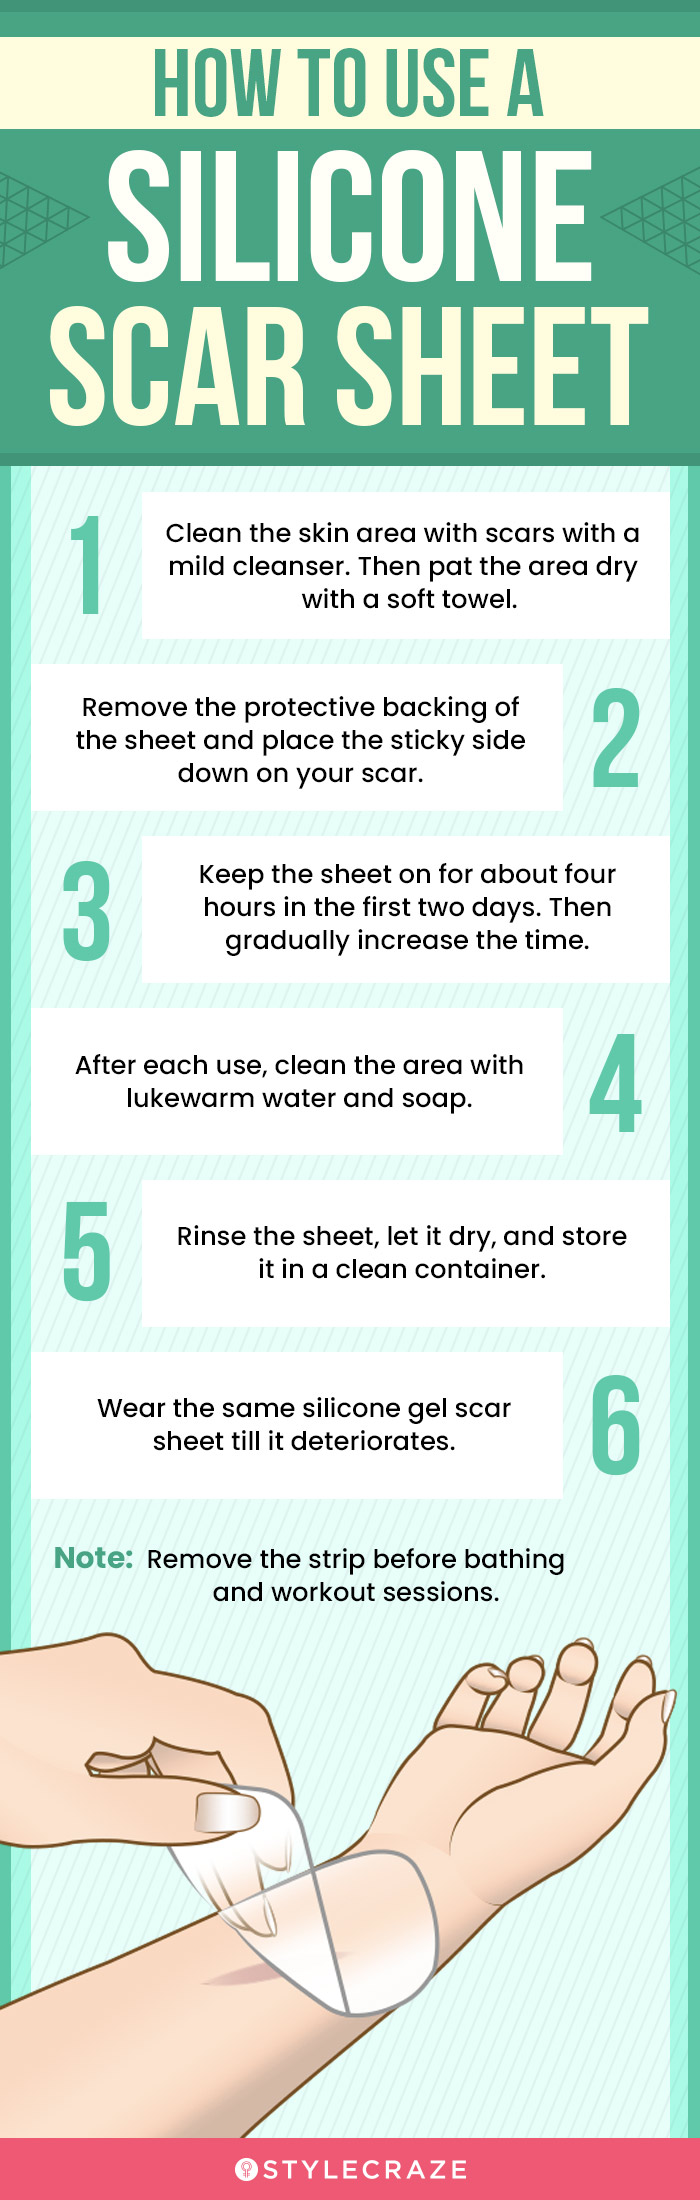 How To Use A Silicone Scar Sheet (infographic)